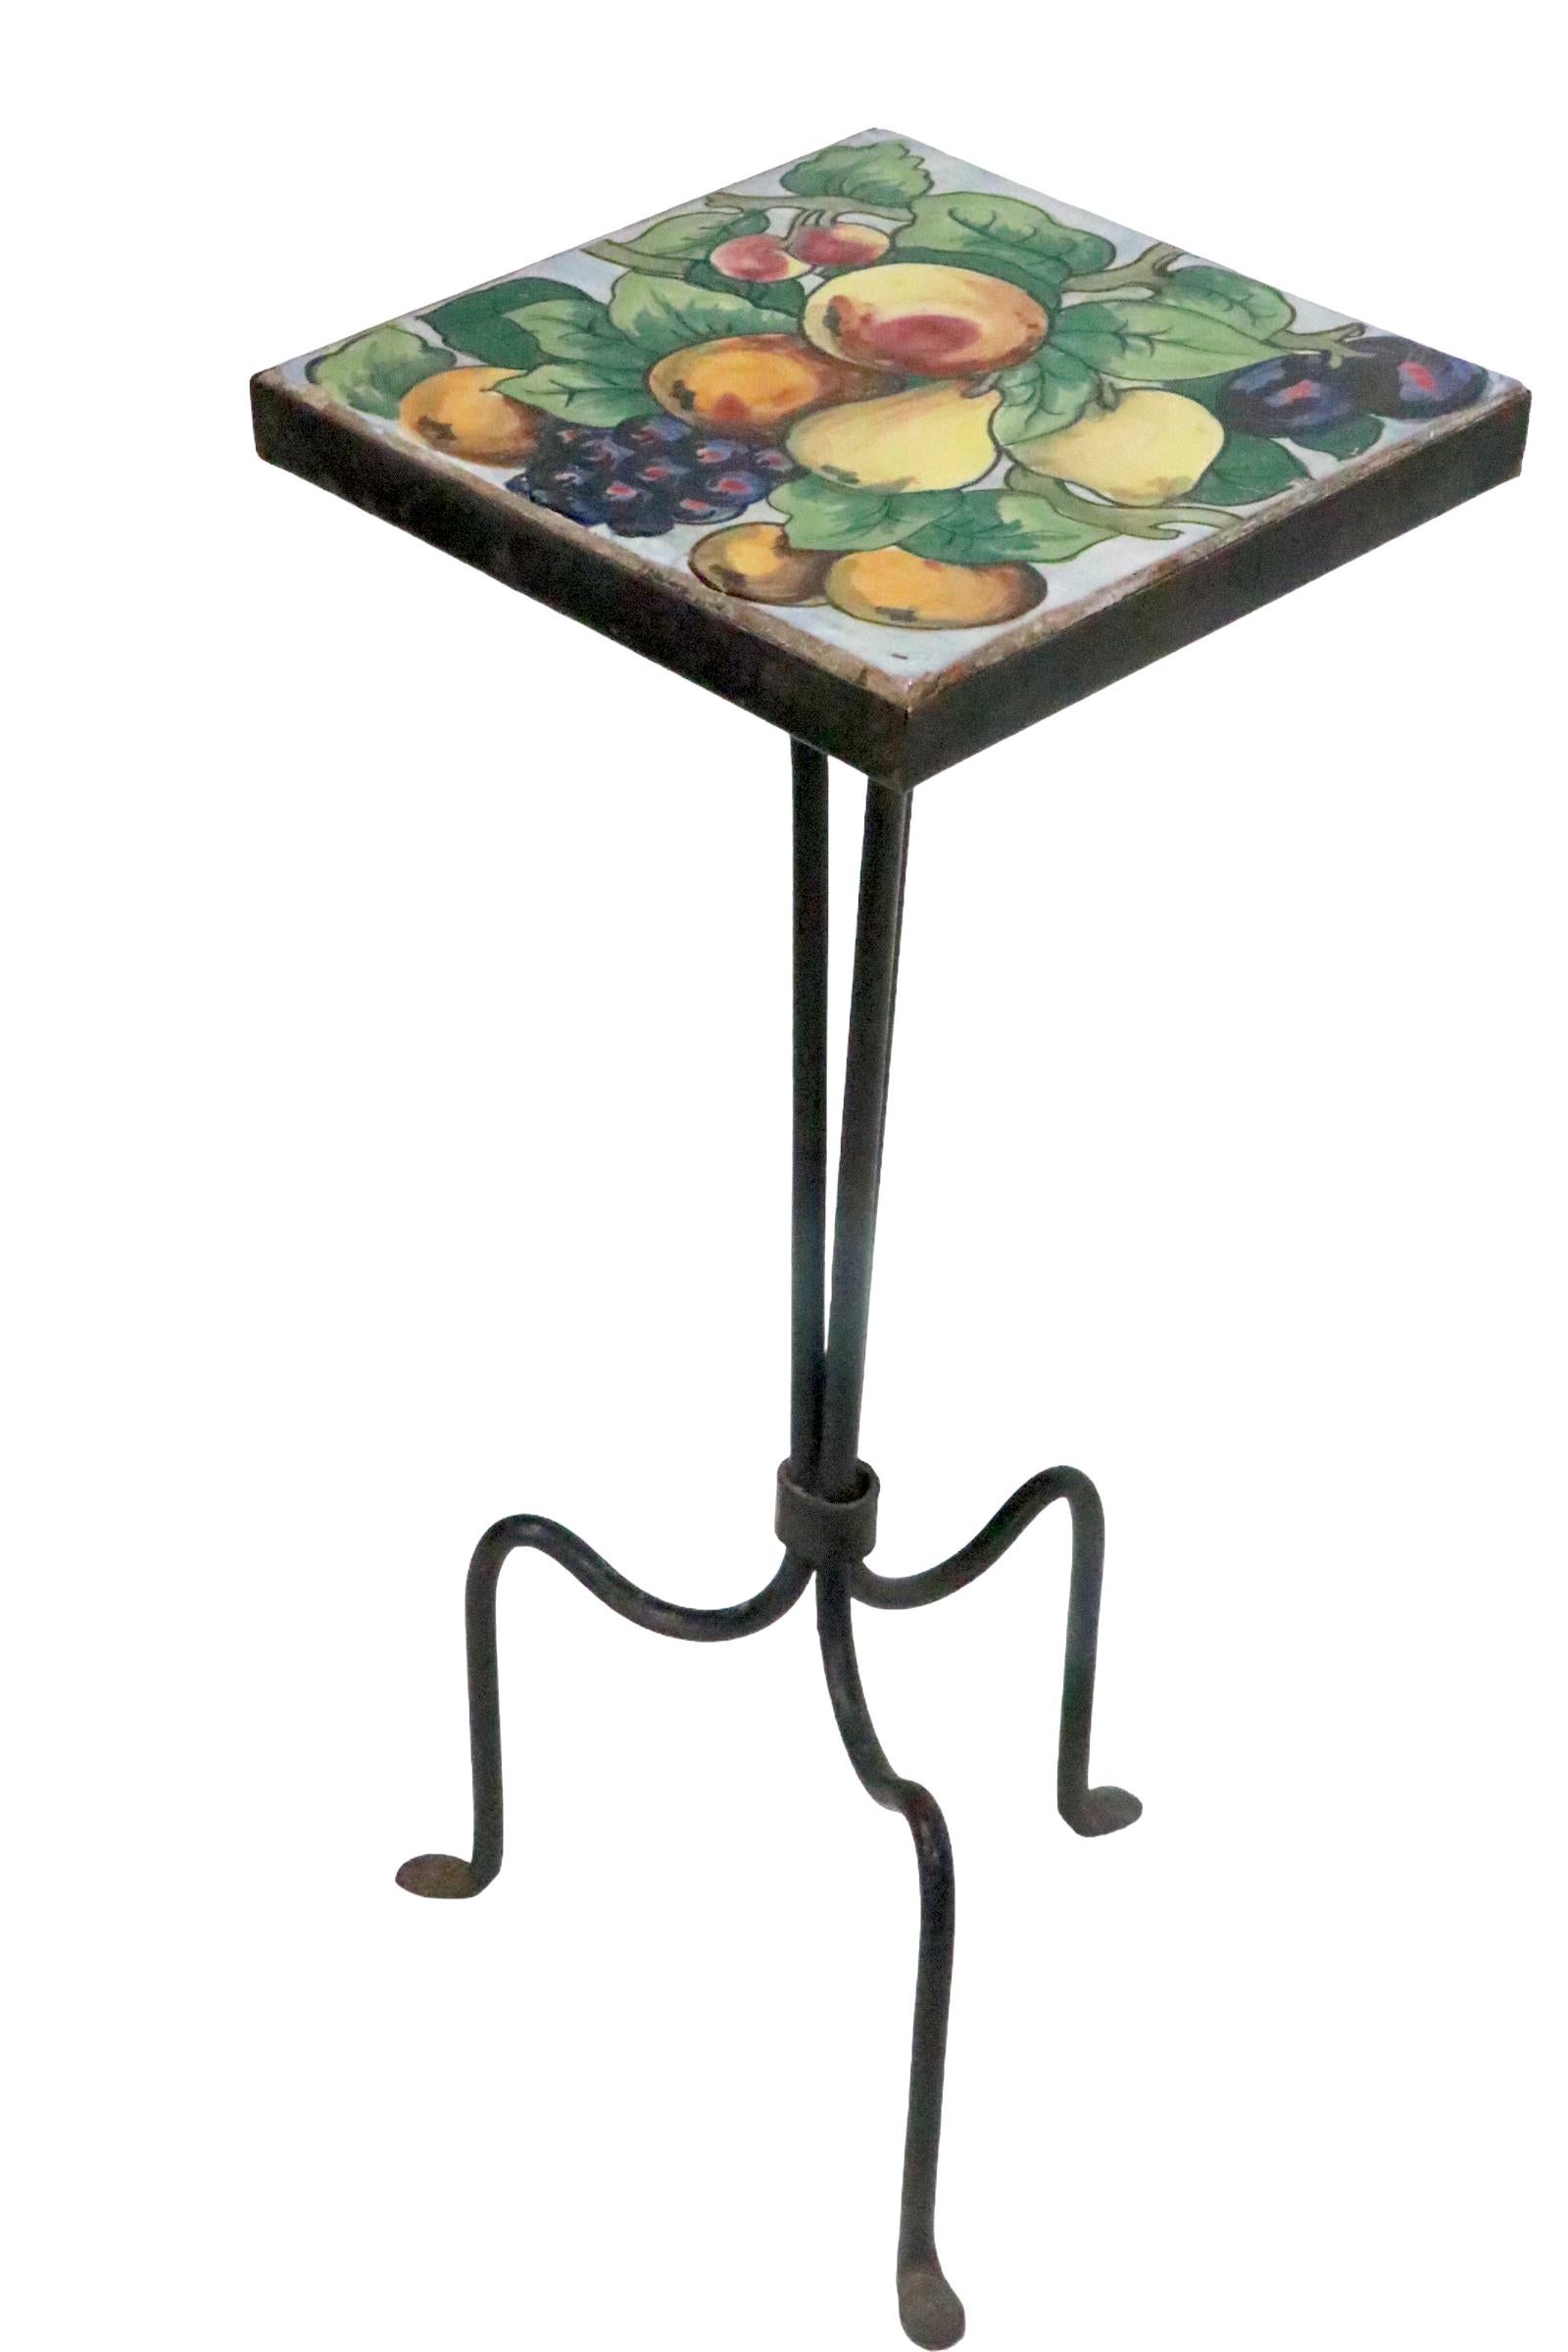 American Wrought iron and Tile Top Table att. to Addison Mizner c 1920's For Sale